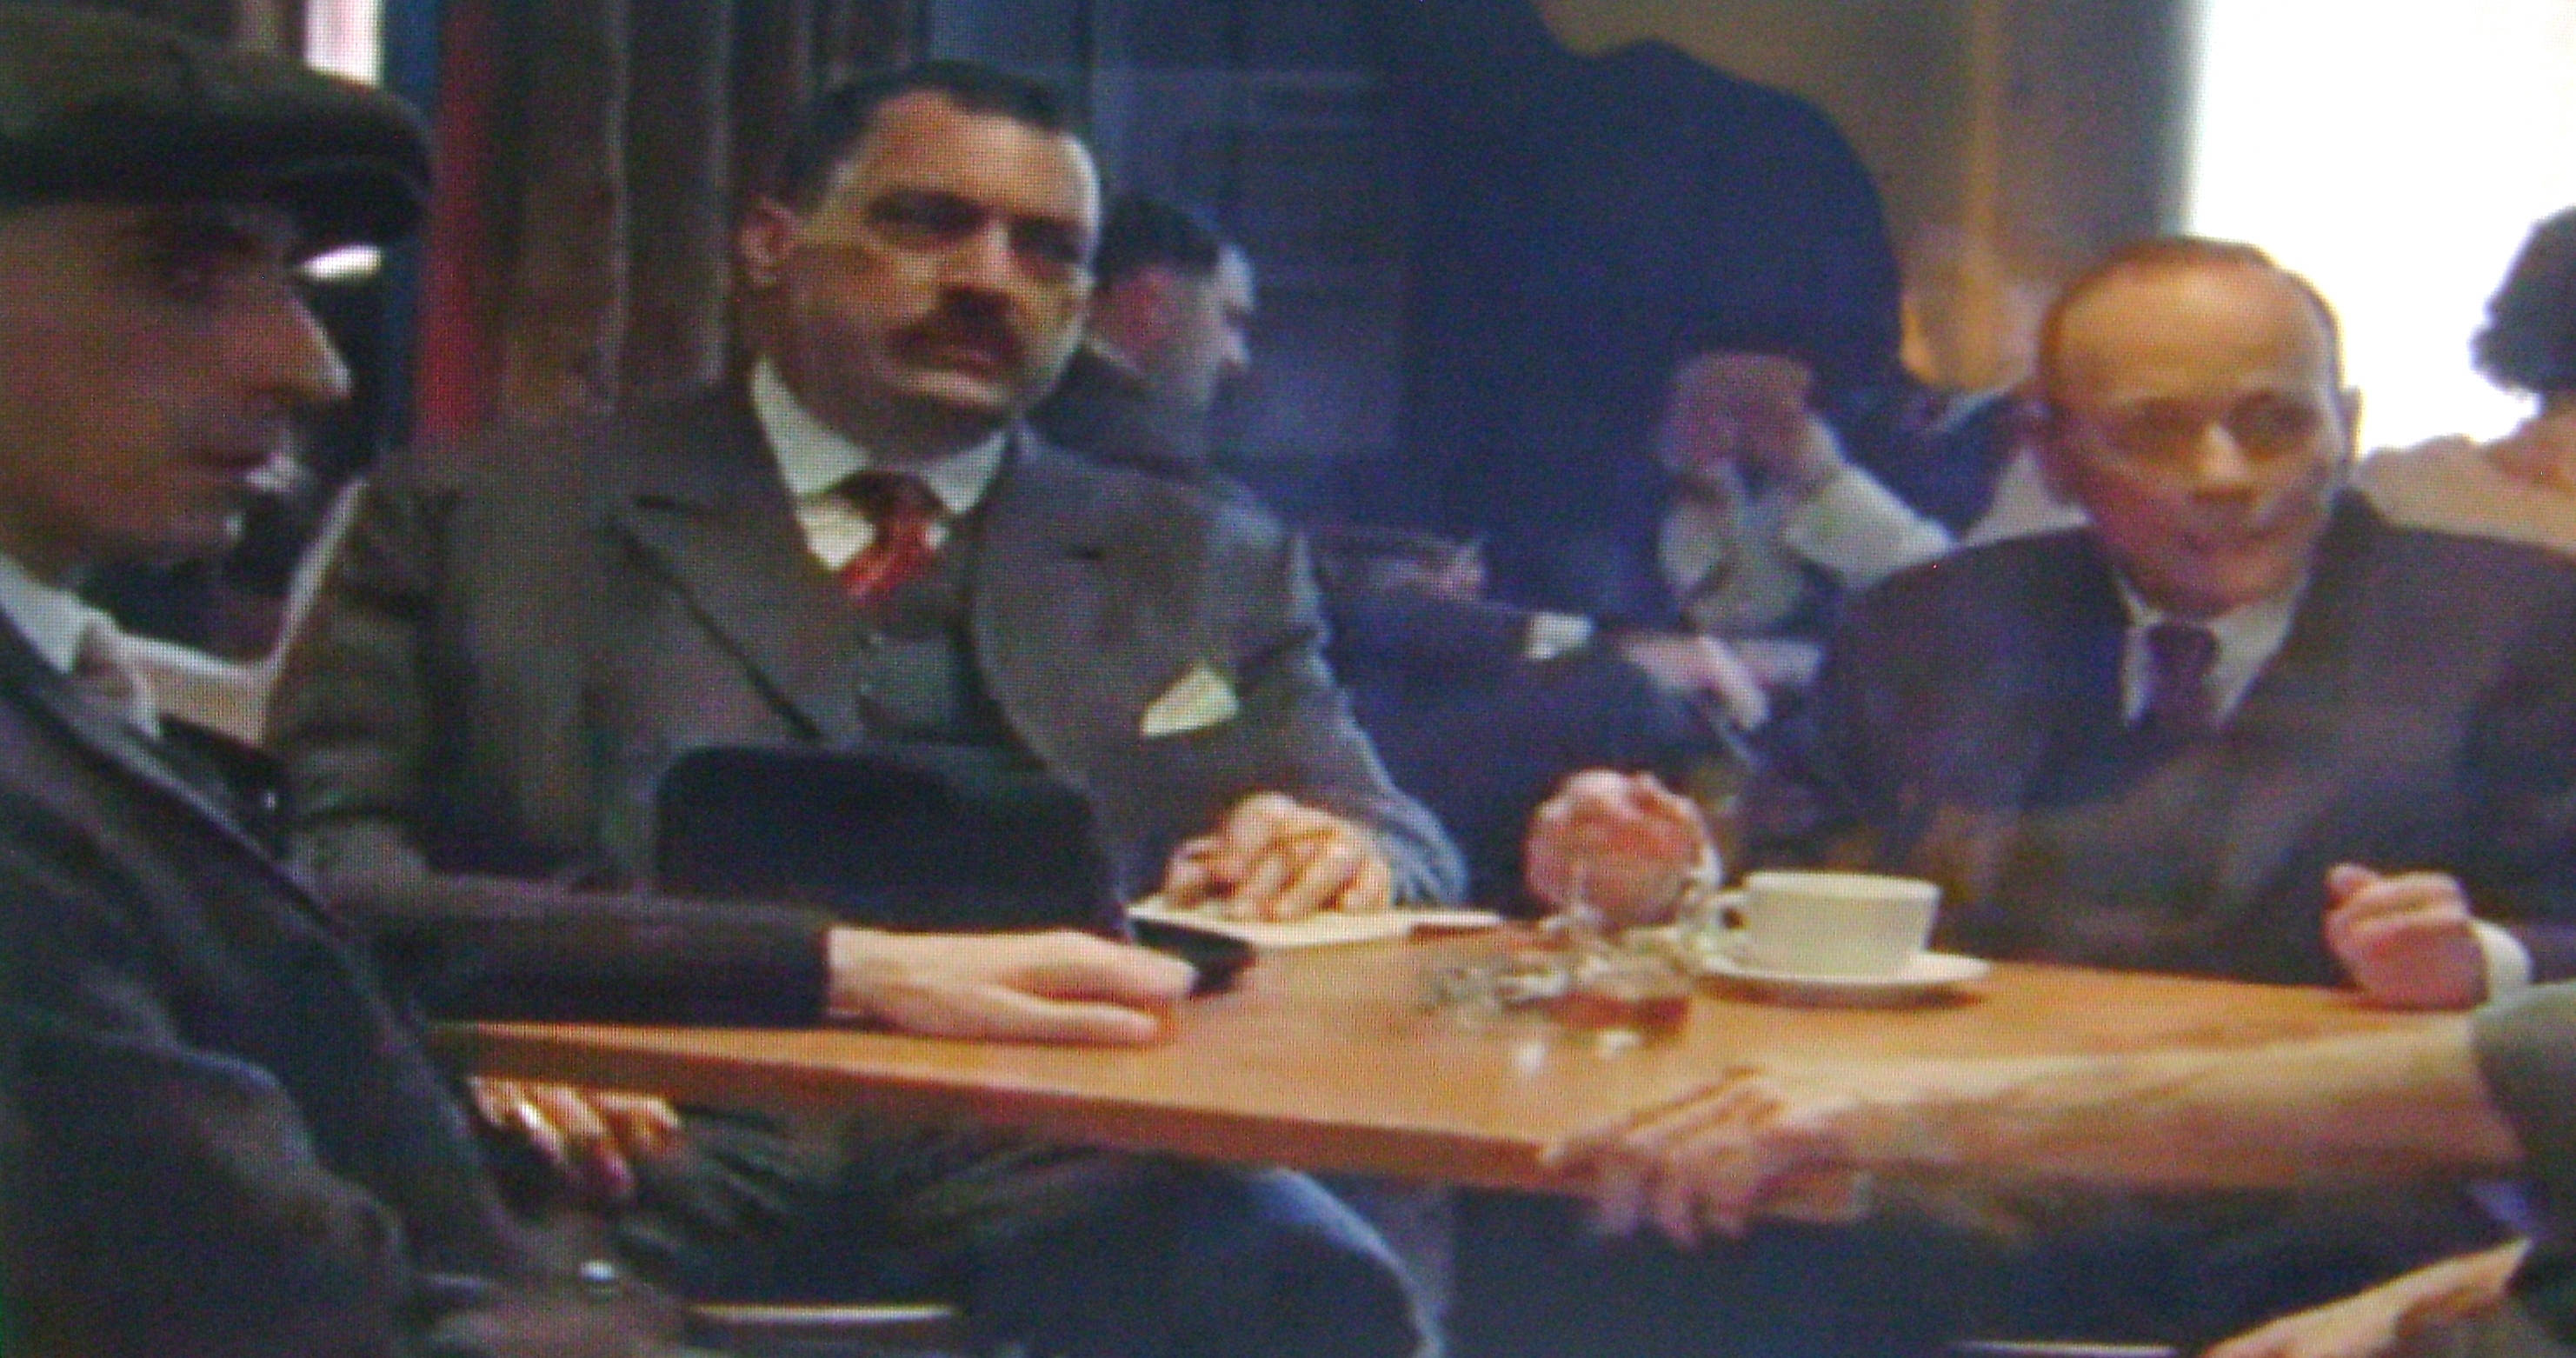 HBO Boardwalk Empire Gangster Ken Sladyk in a Chicago meeting with Johnny Torrio. Waiting with pencil and paper in hand, Johnny Torrio shows his high powered money controller the envelope thick with cash that Jake Guzik bring's in. (scene 1/10)